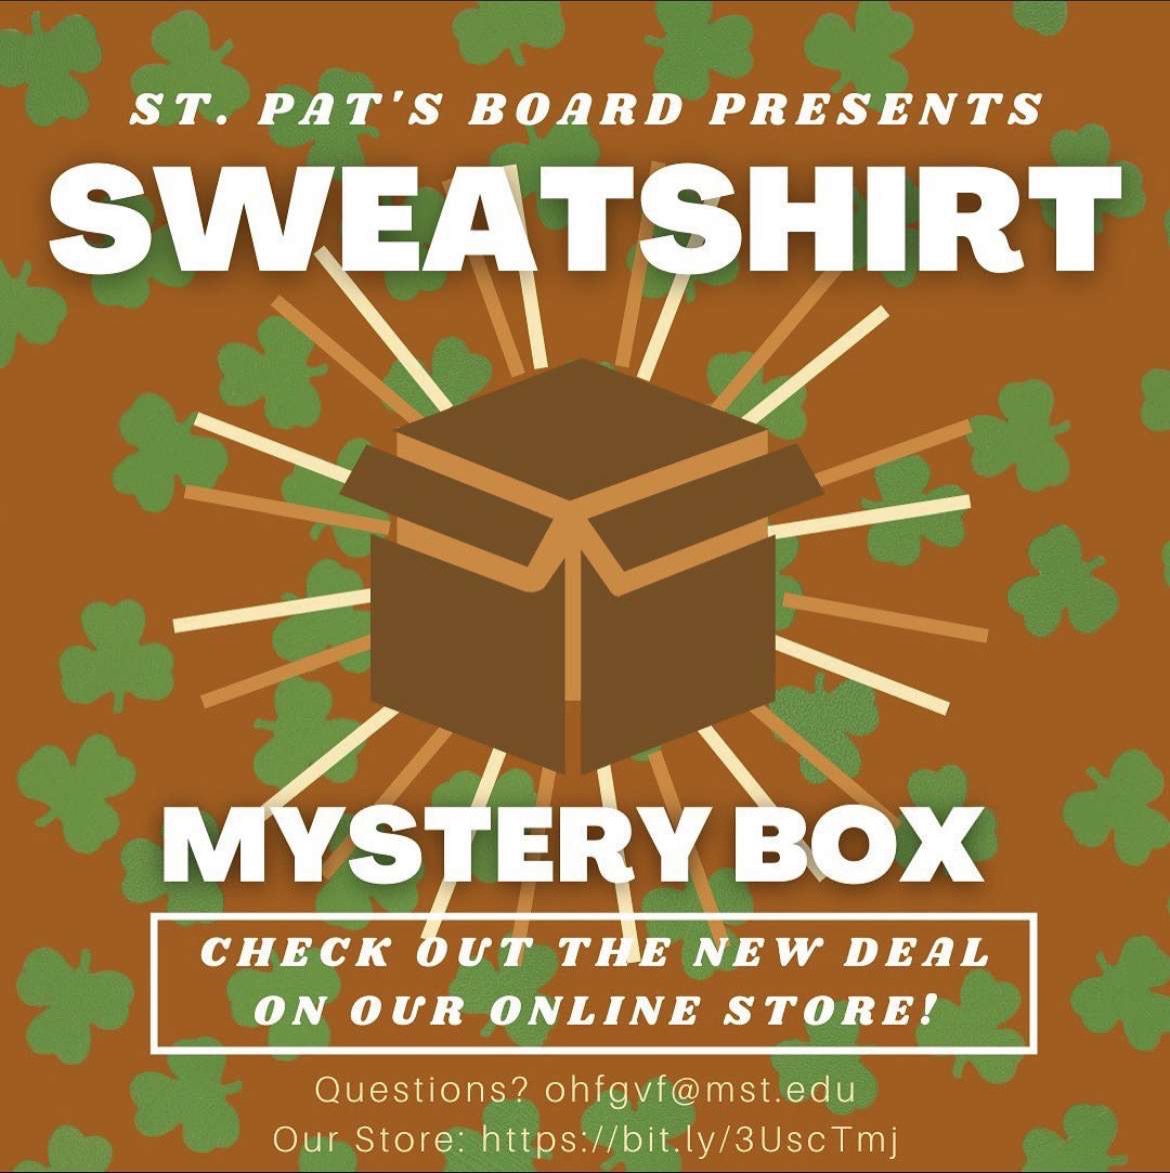 Check out the Mystery Box!!